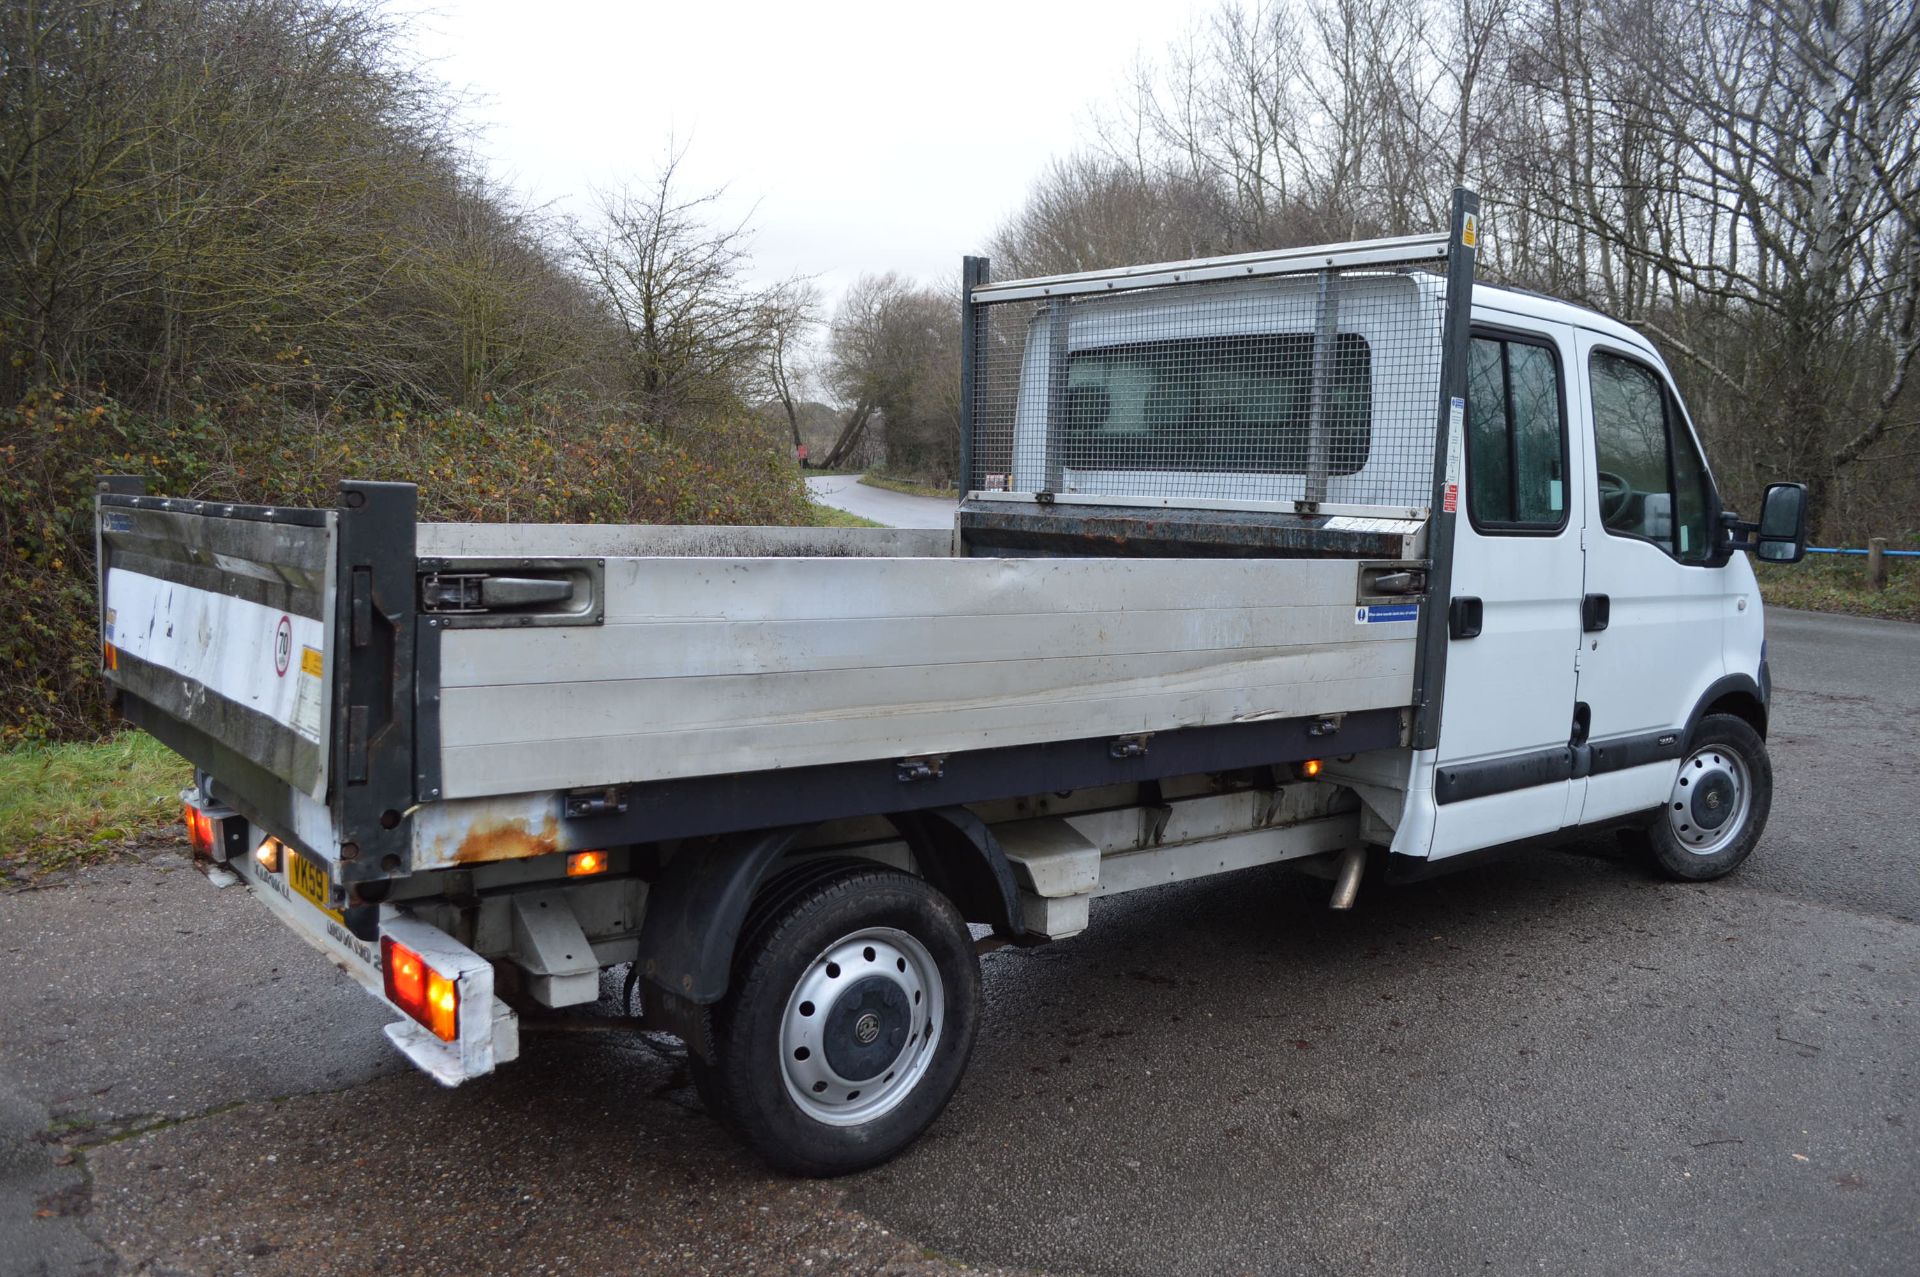 2009/59 REG VAUXHALL MOVANO 3500 CDTI LWB DOUBLE CAB TIPPER, SHOWING 2 FORMER KEEPERS *NO VAT* - Image 6 of 18